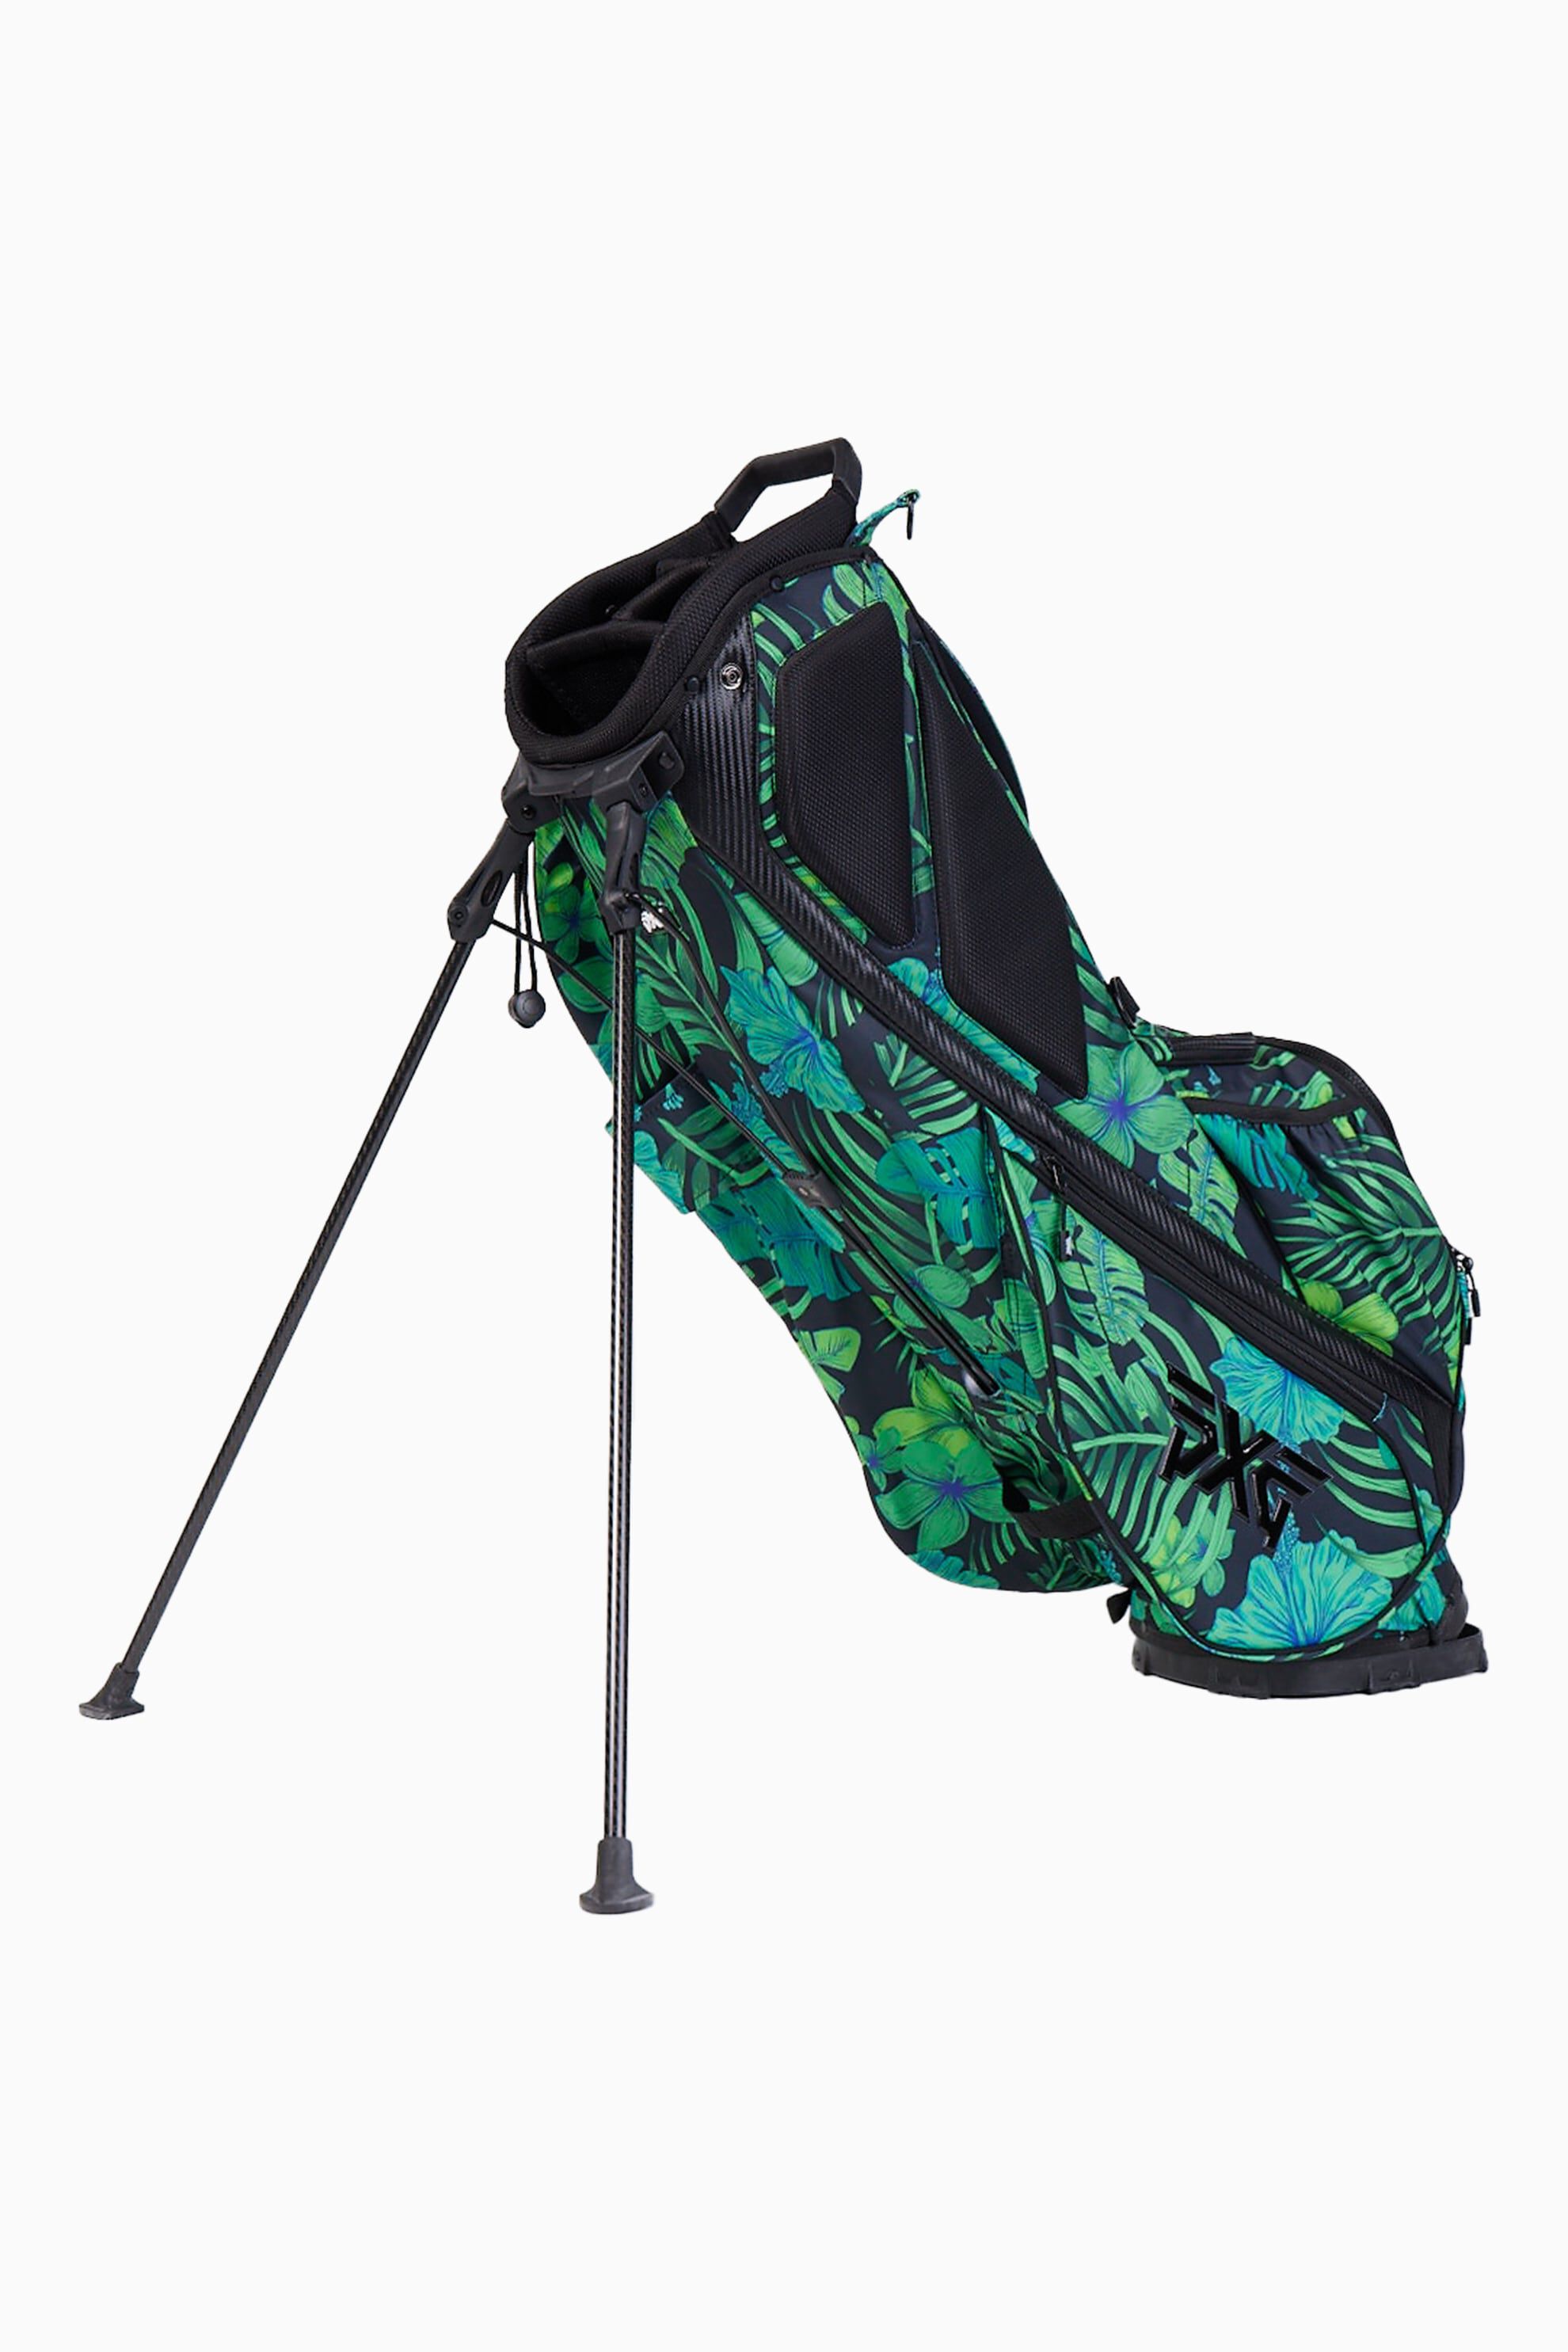 Z85 STAND BAG  BRIGHT GREEN CAMOUFLAGE  Srixon Golf